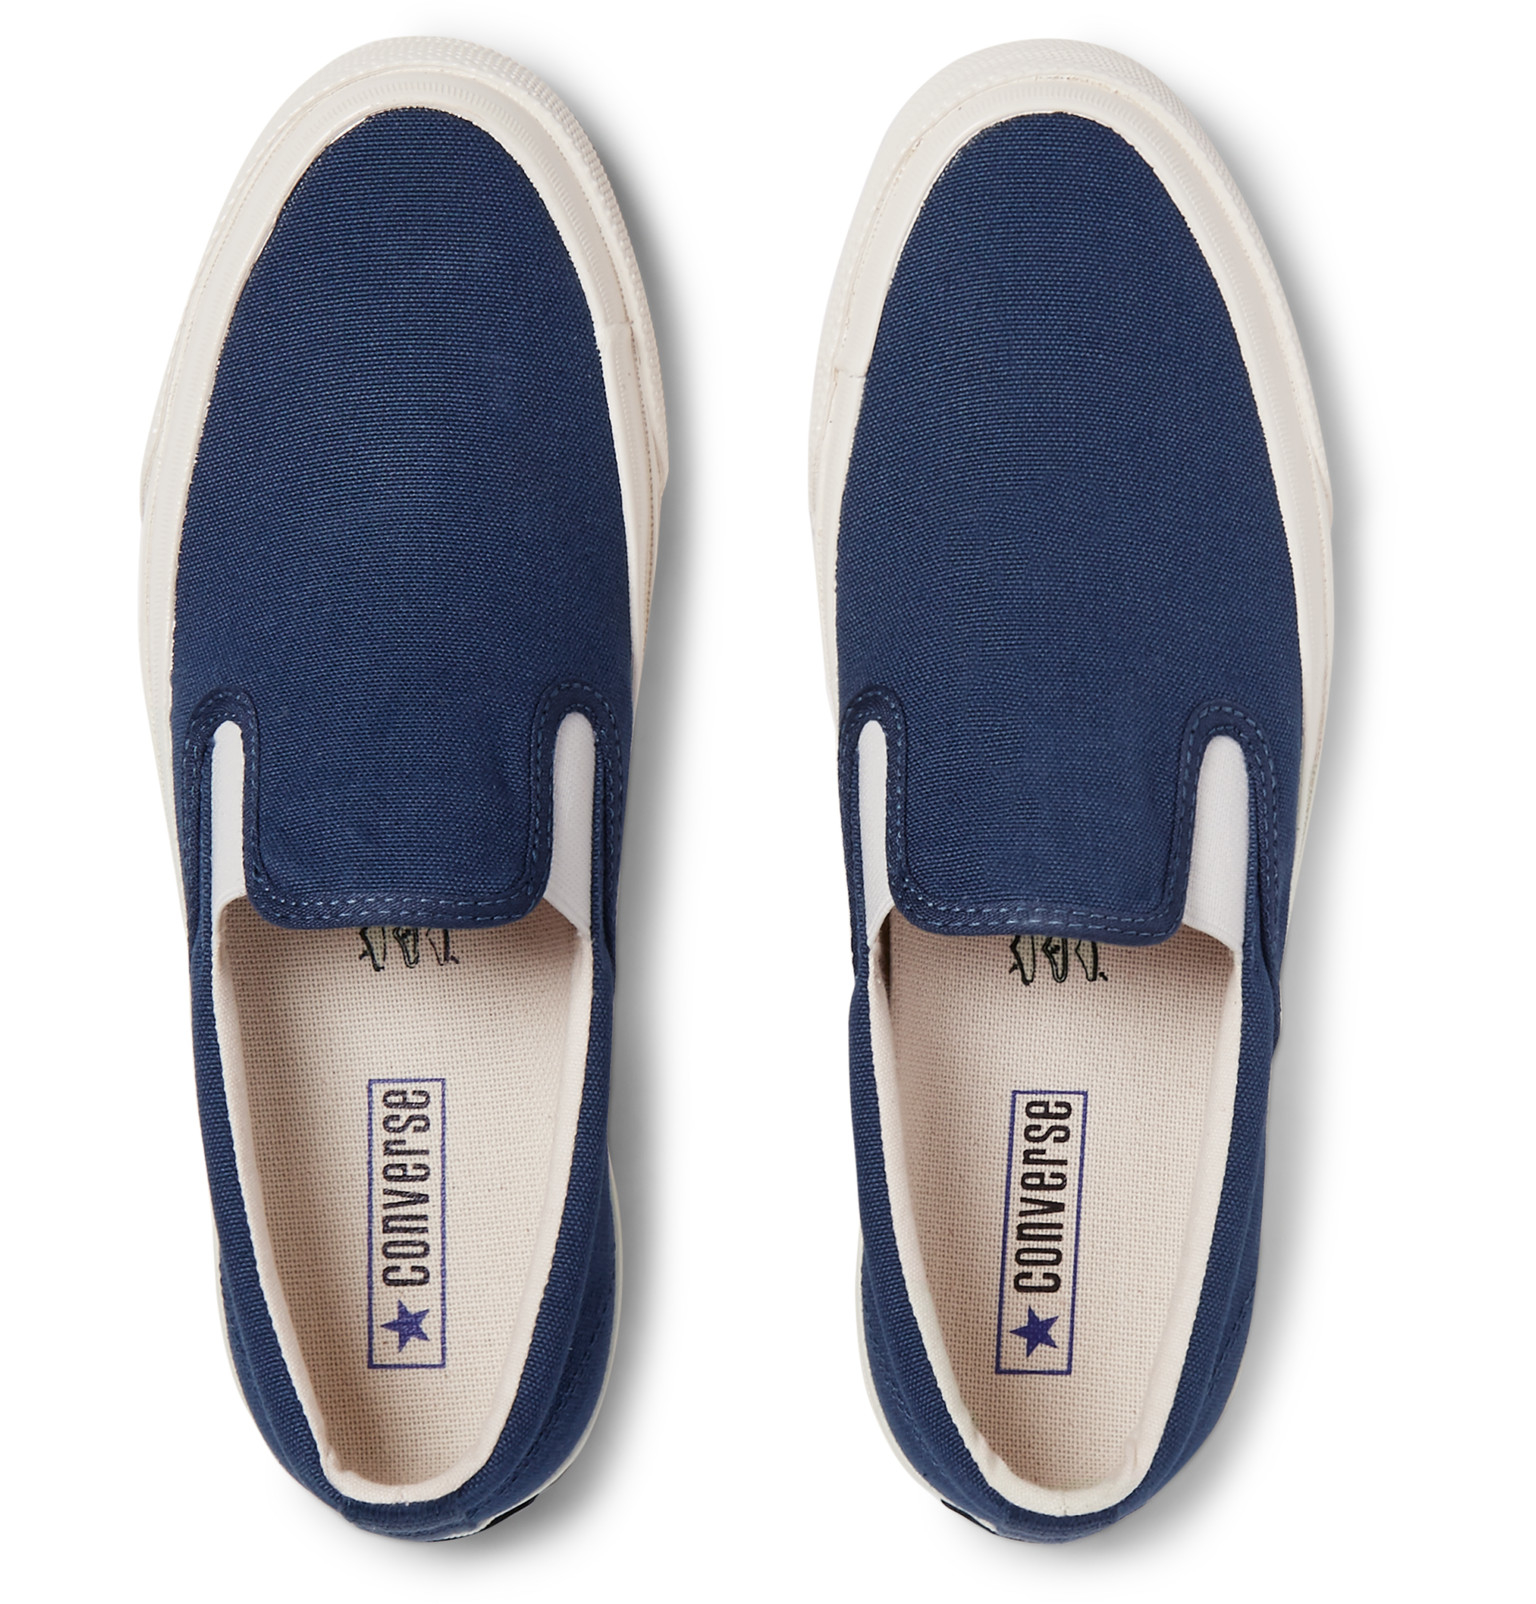 Converse Deck Star 70 Canvas Slip-on Sneakers in Navy (Blue) for Men - Lyst